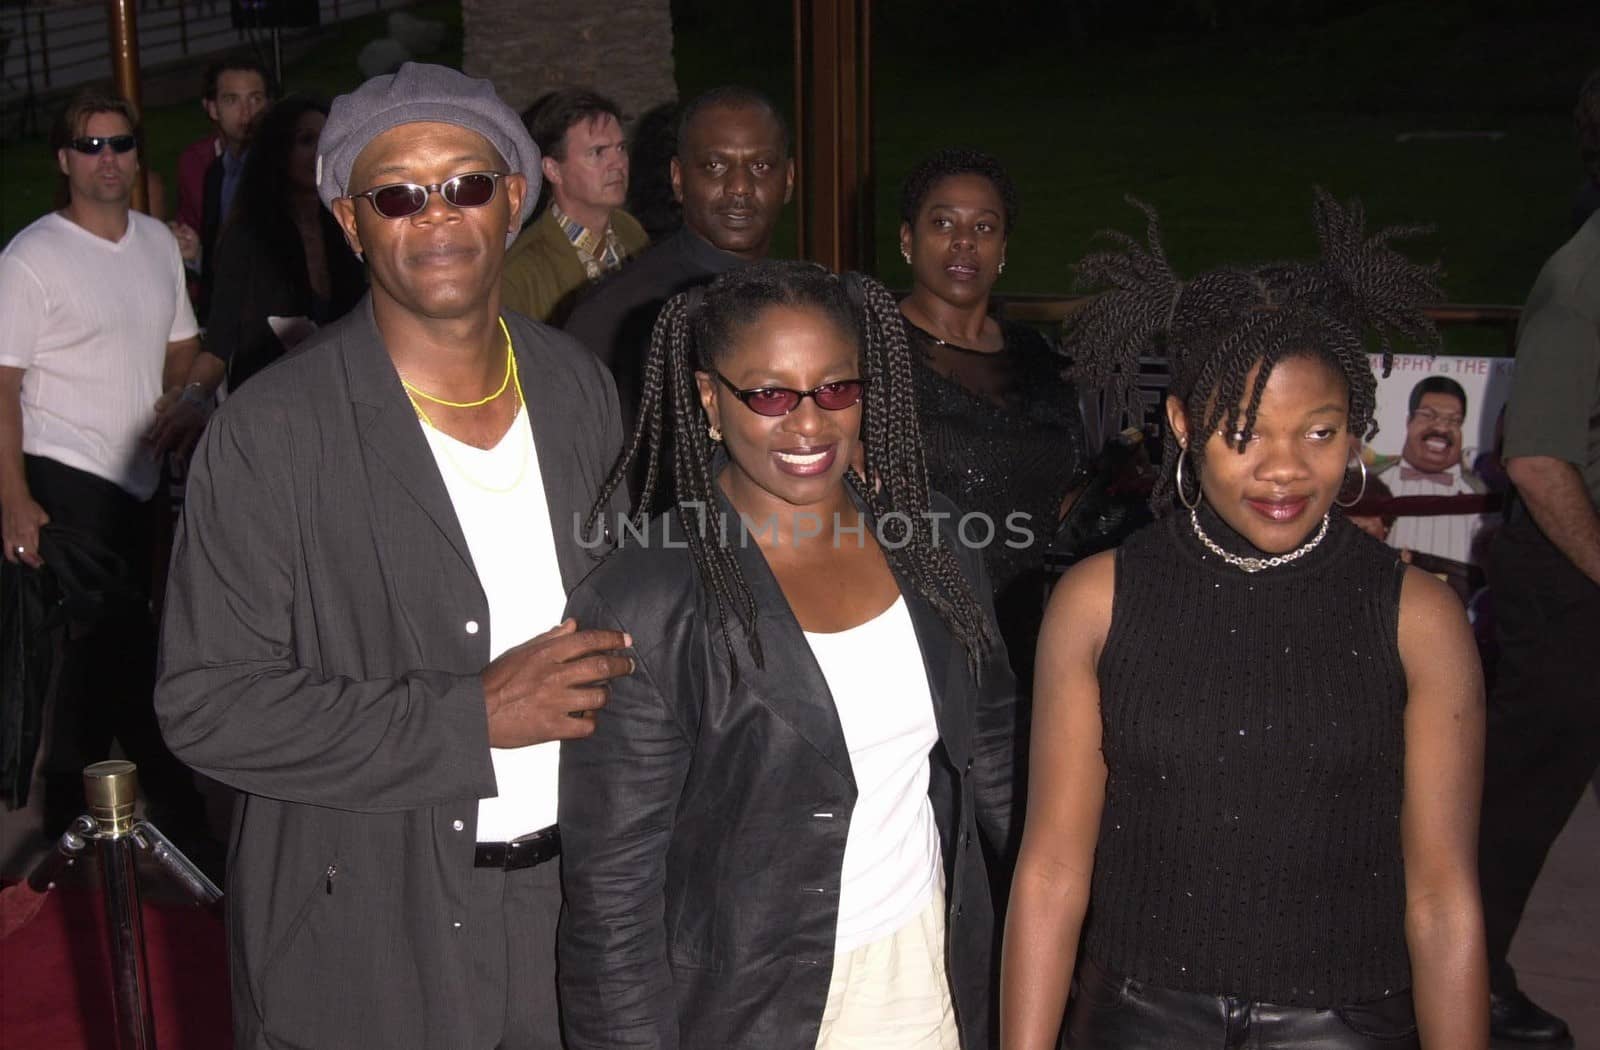 Samuel L. Jackson and Family at the premiere of Nutty Professor II in Universal City. 07-24-00